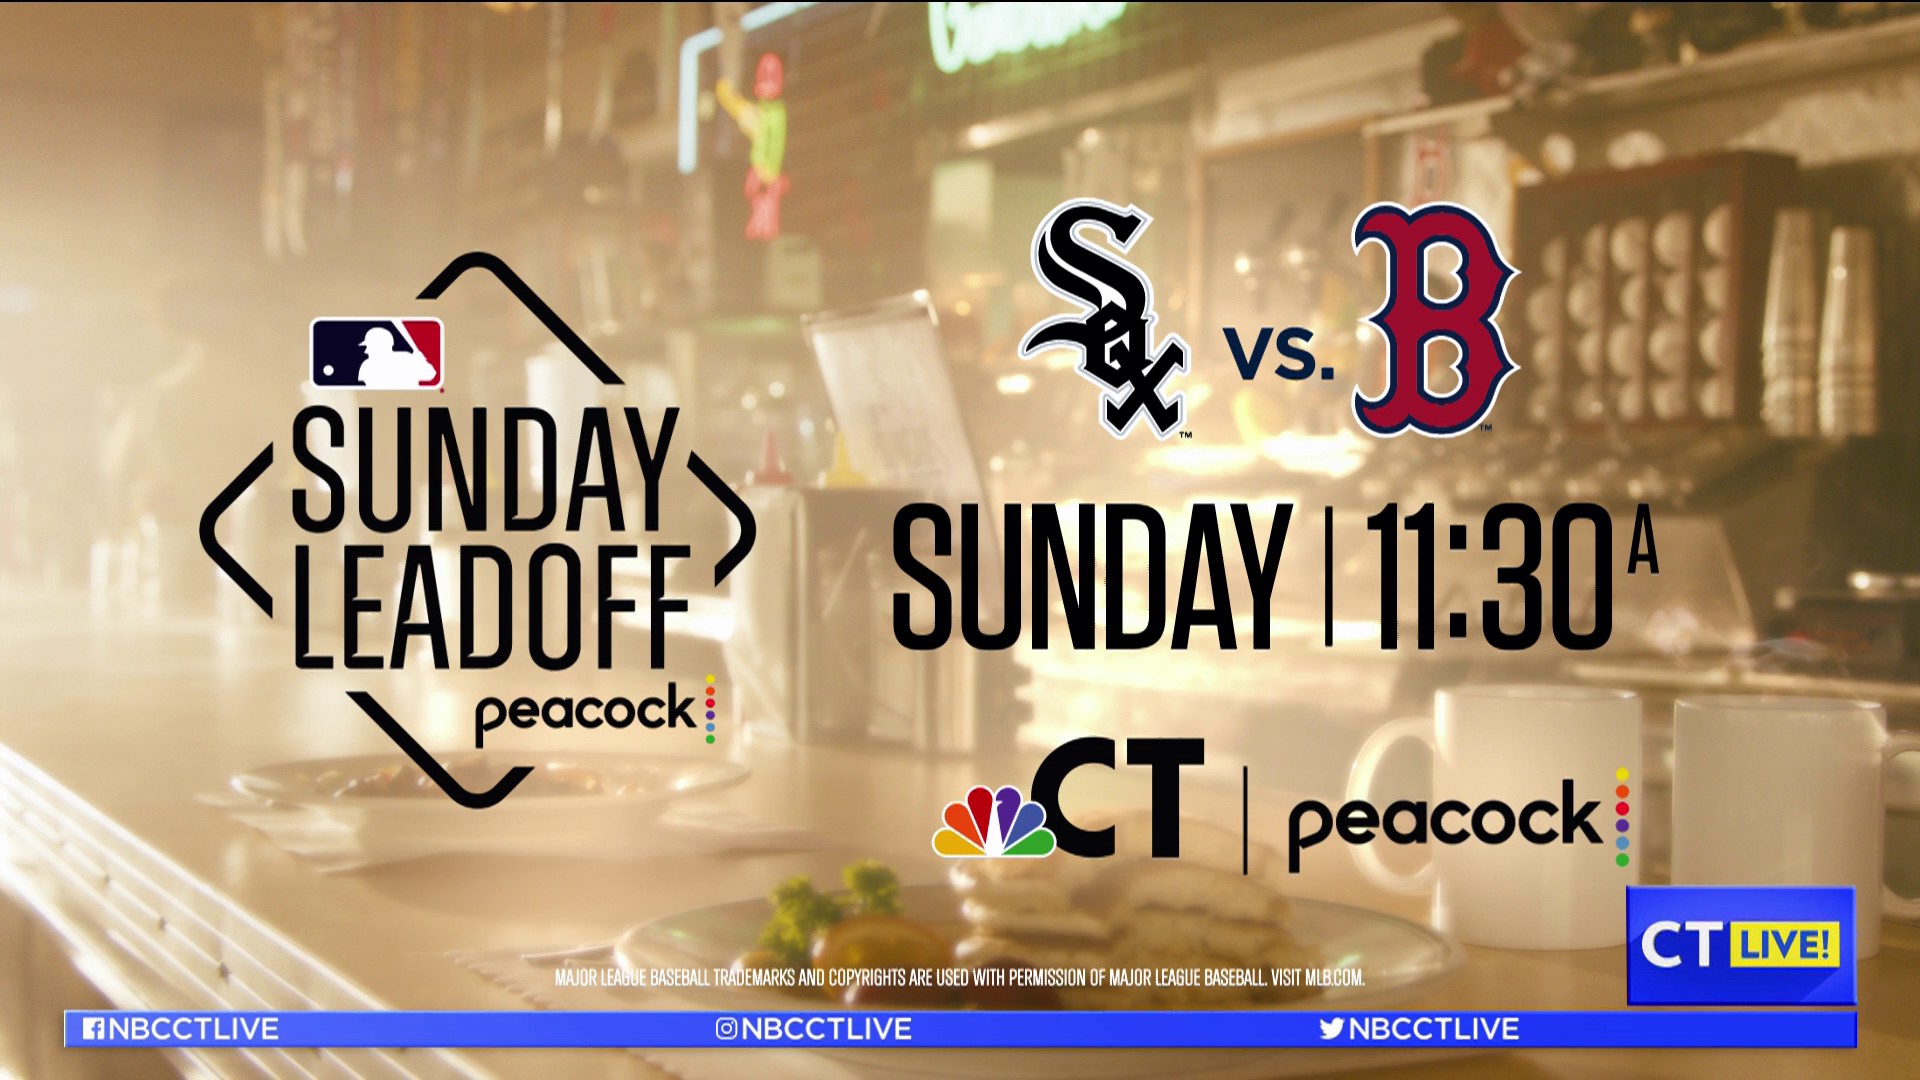 CT LIVE! MLB Games Are Now on Peacock!